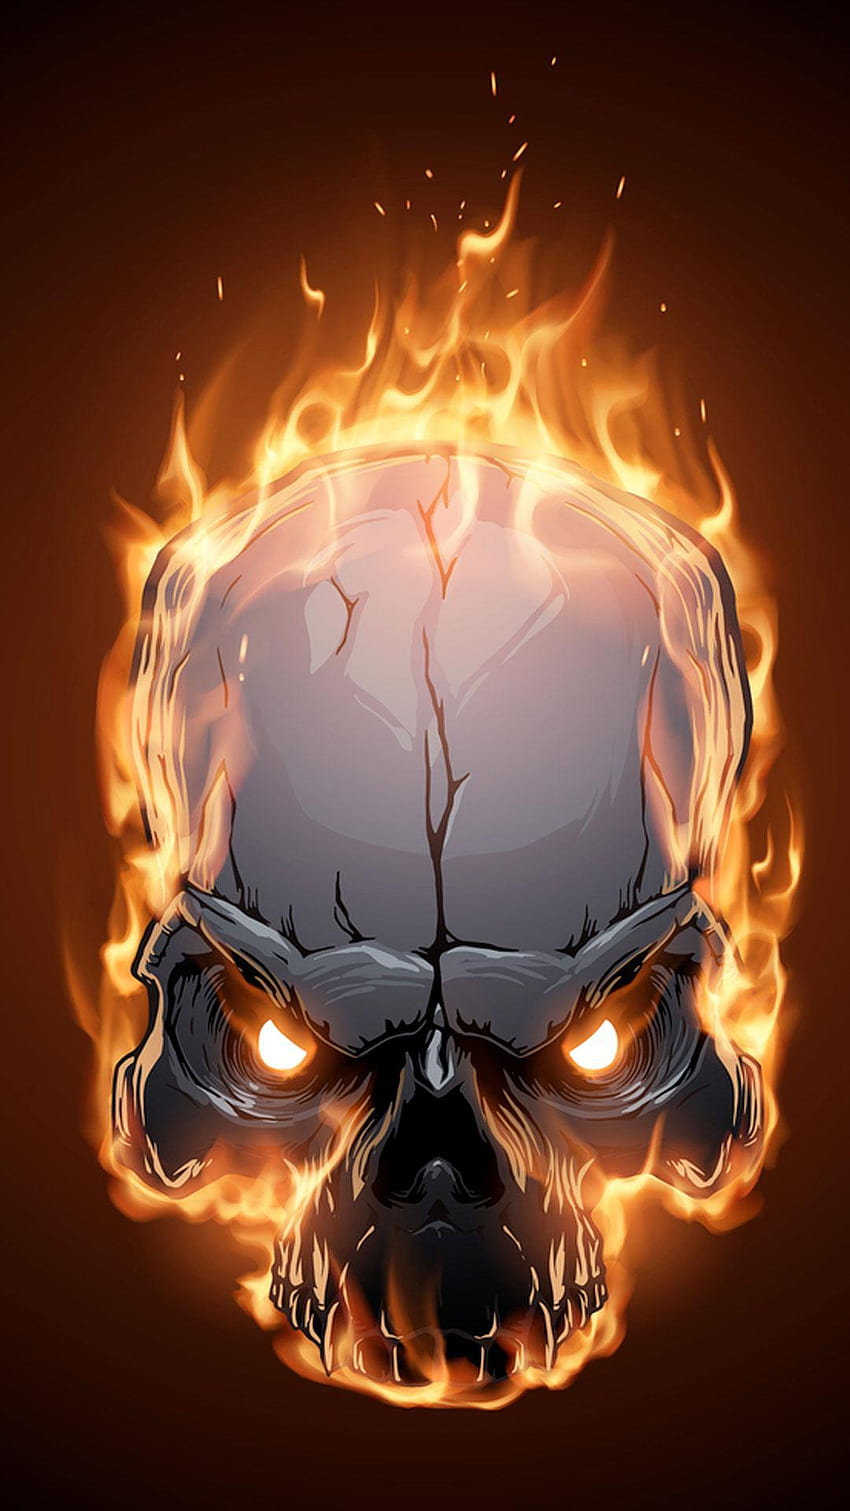 Skull WallpaperAmazoncaAppstore for Android